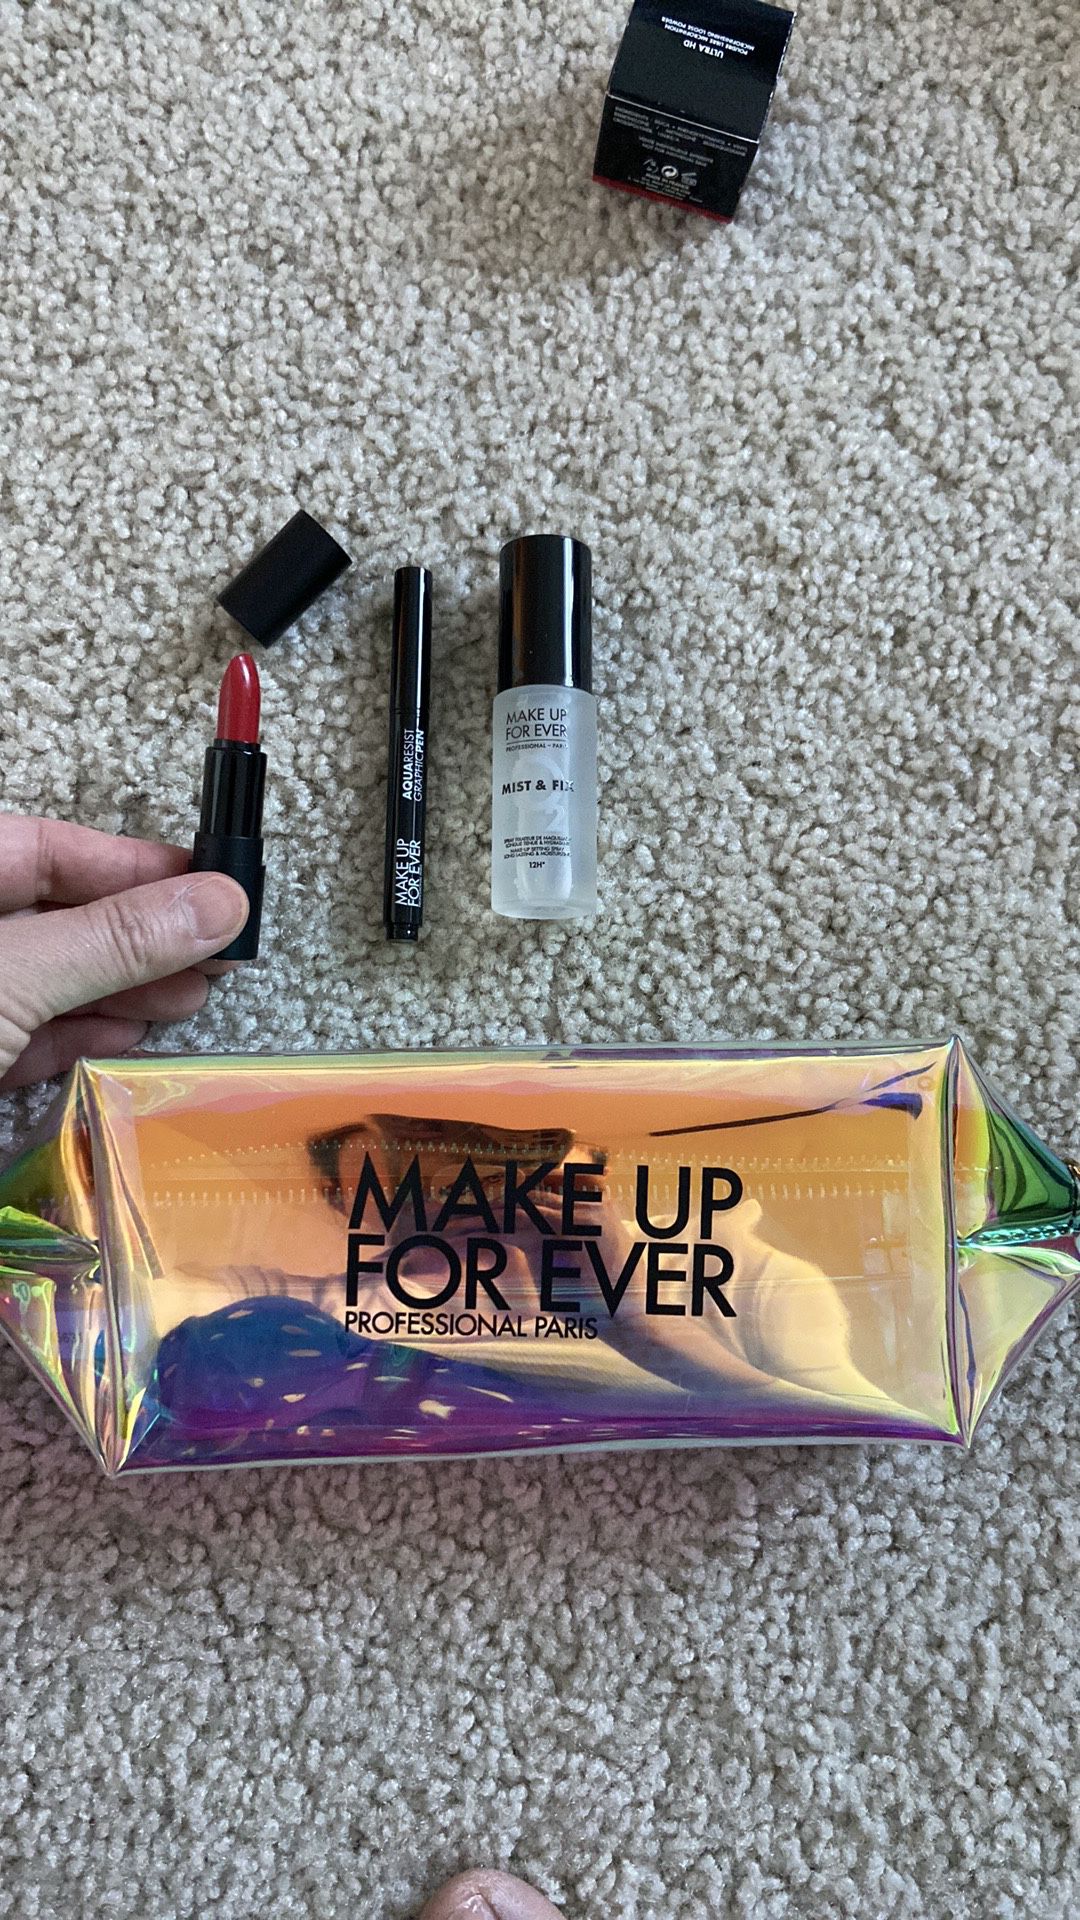 Makeup forever deluxe makeup set